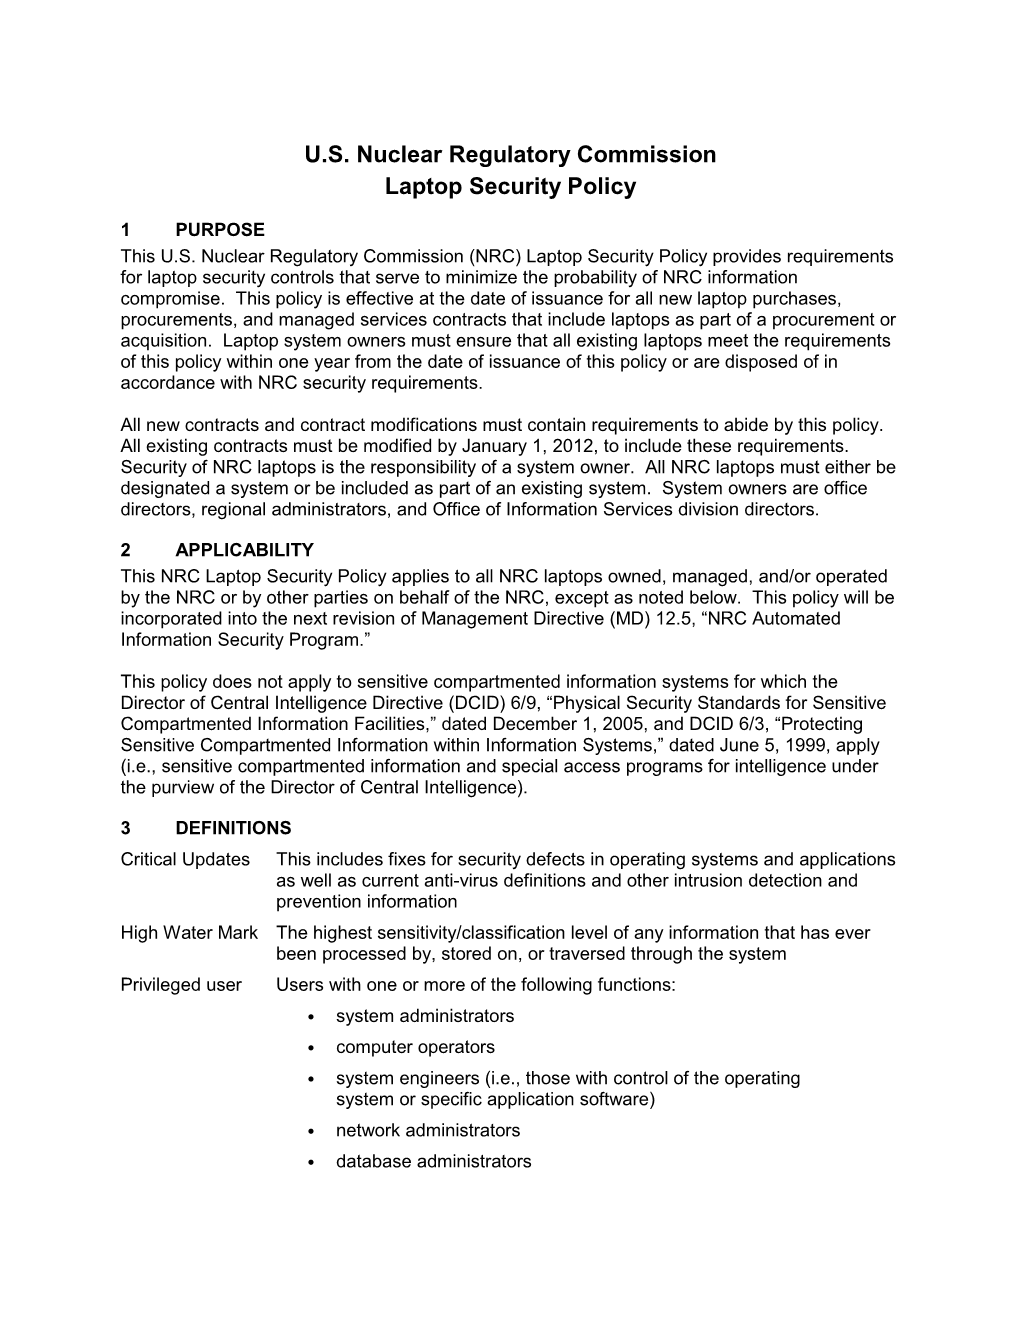 U.S. Nuclear Regulatory Commission Laptop Security Policy